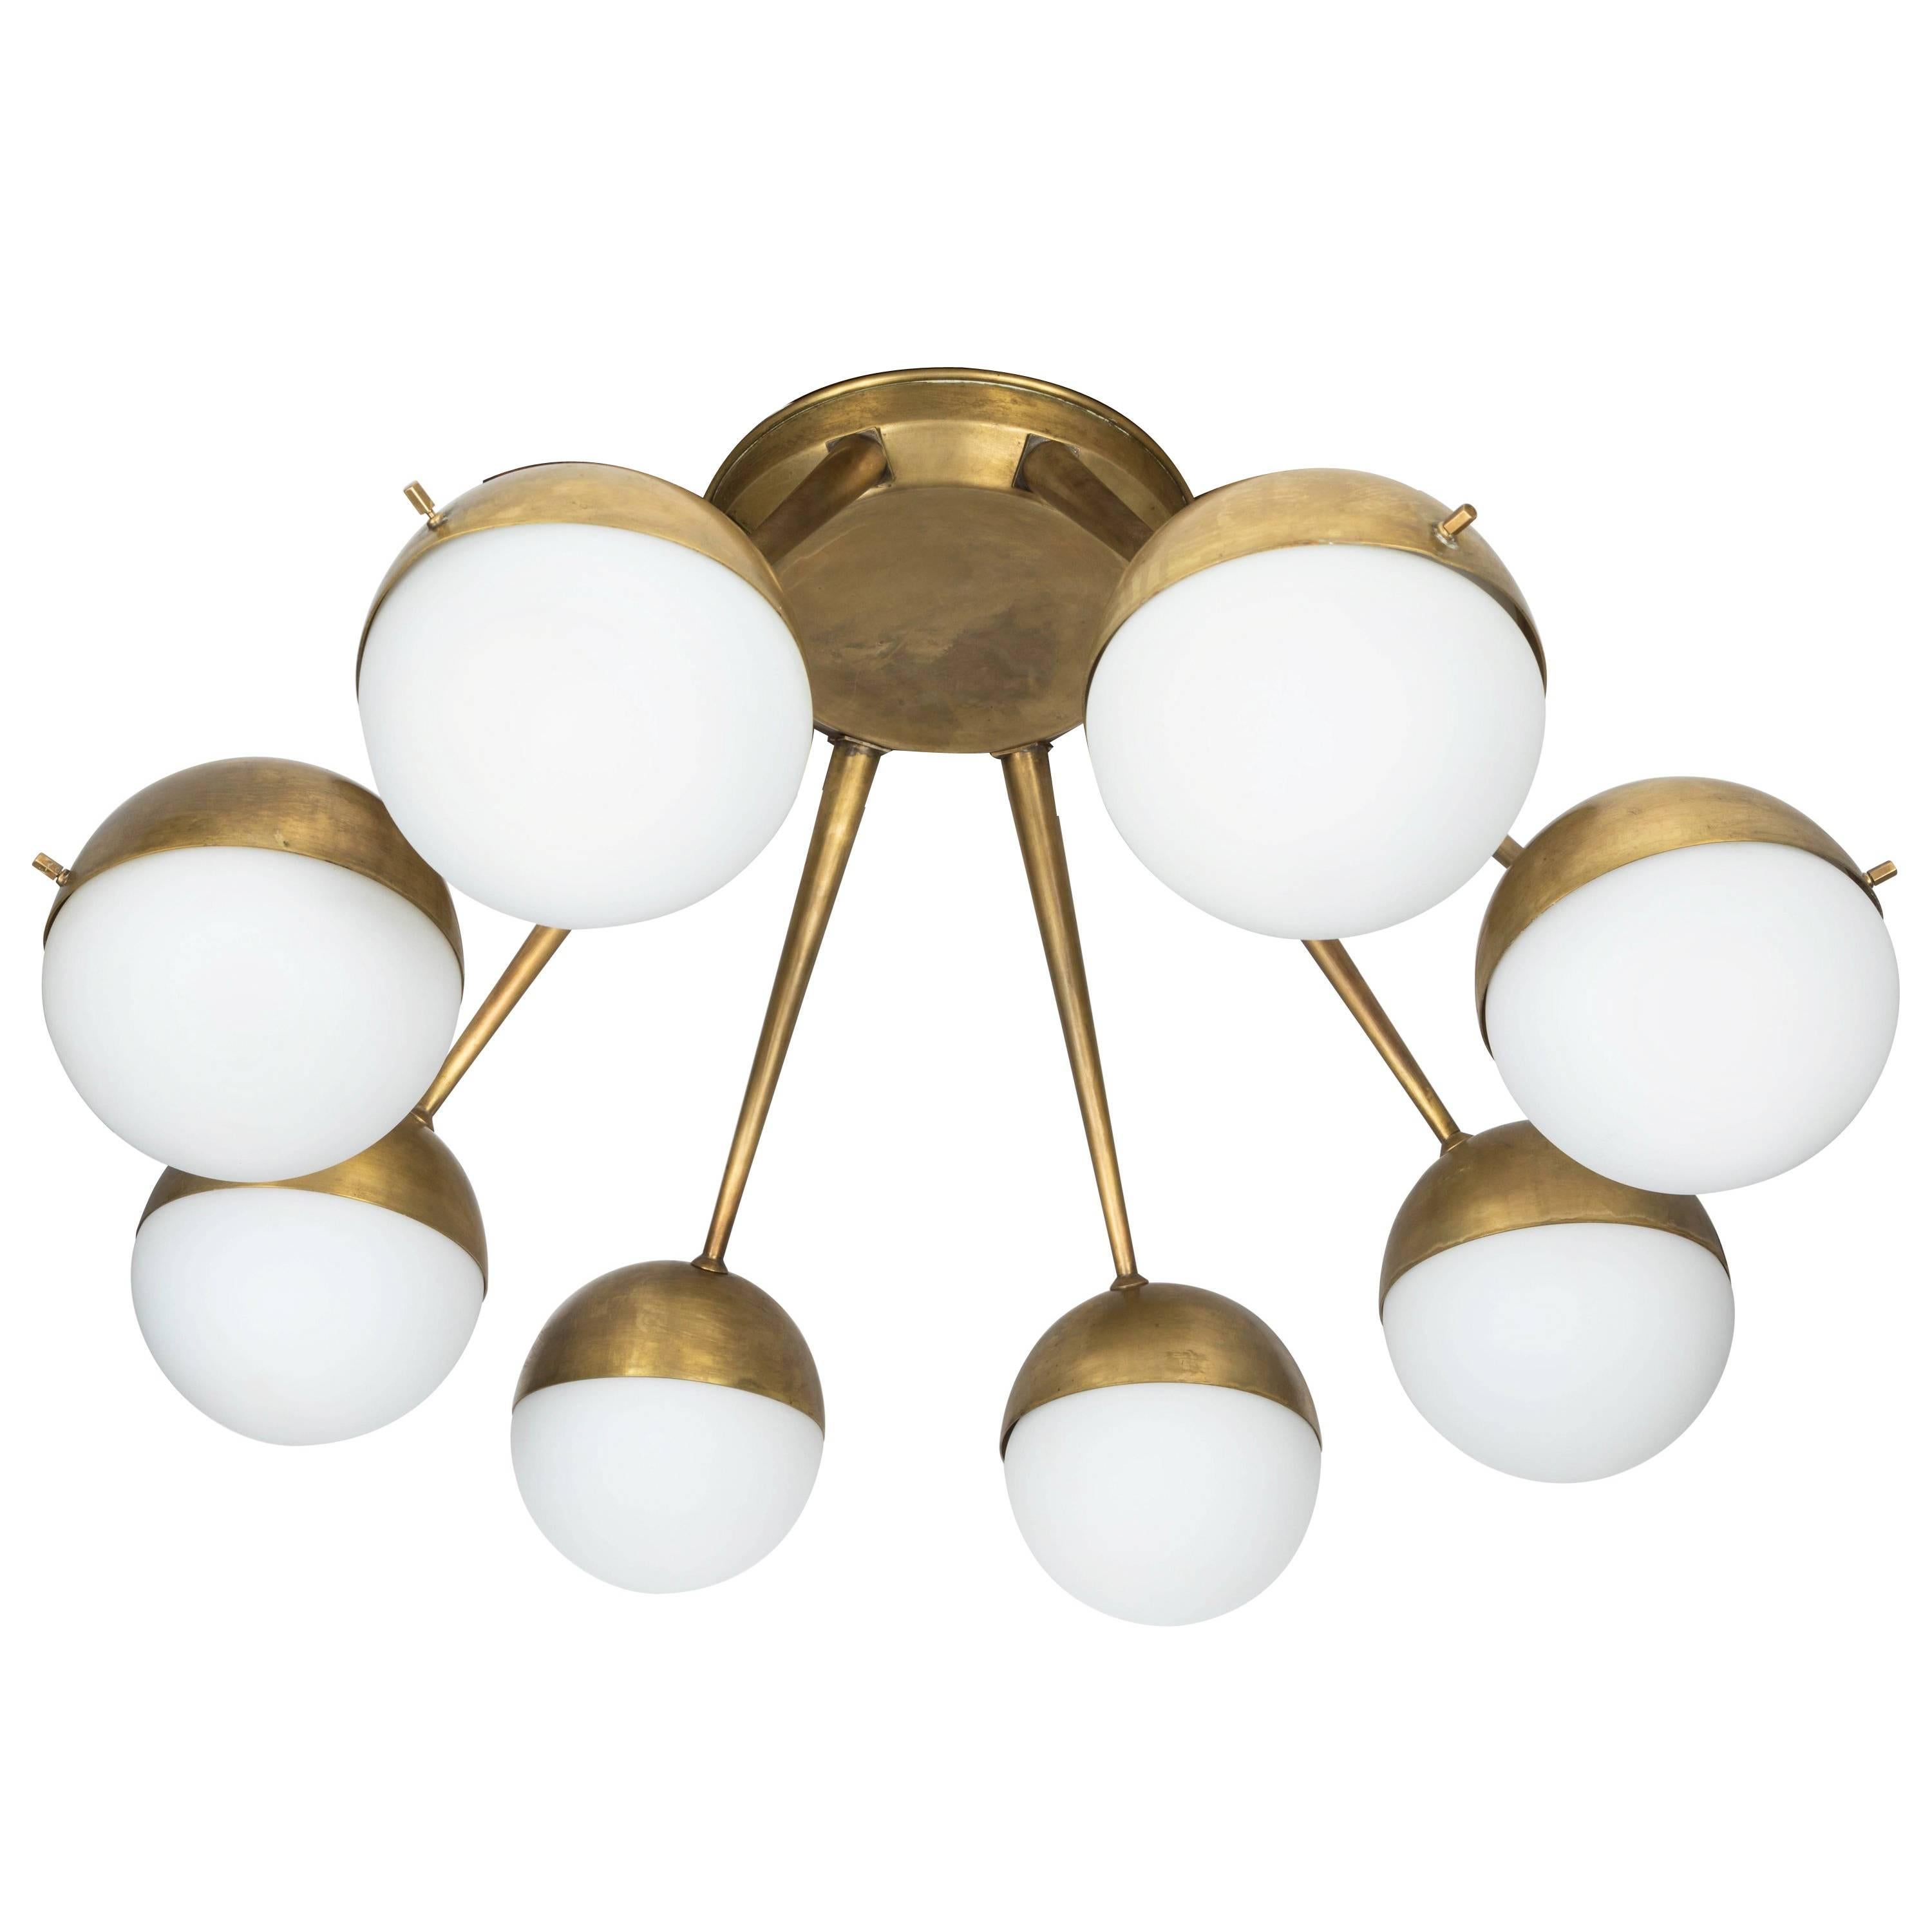 1960s Italian Eight-Arm Brass and Glass Chandelier Attributed to Stilnovo